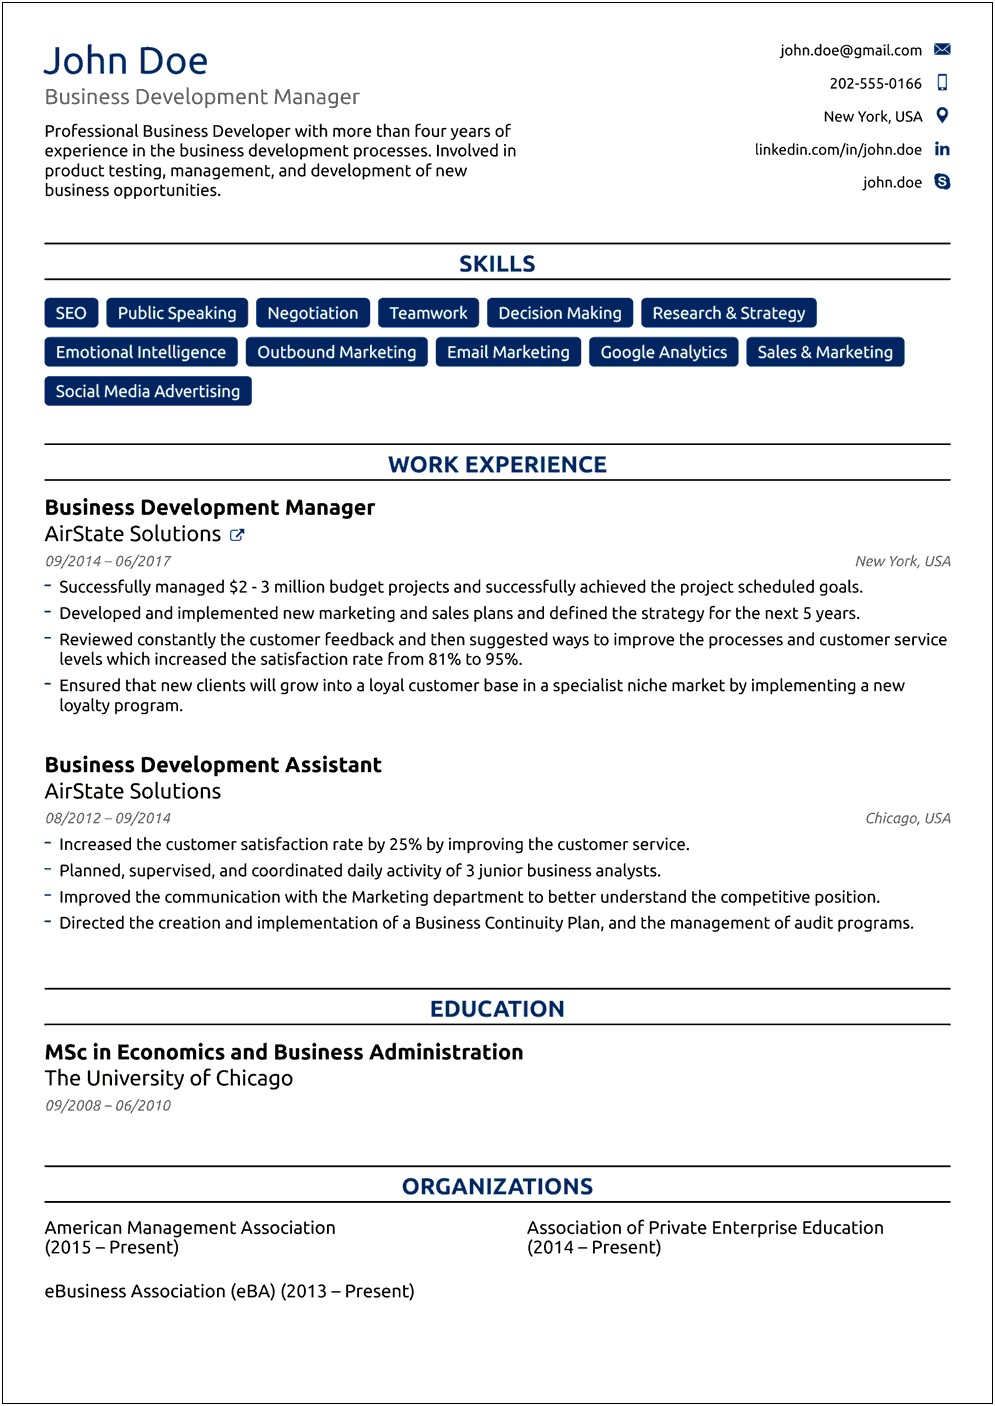 Free Professional Resume Template 2014